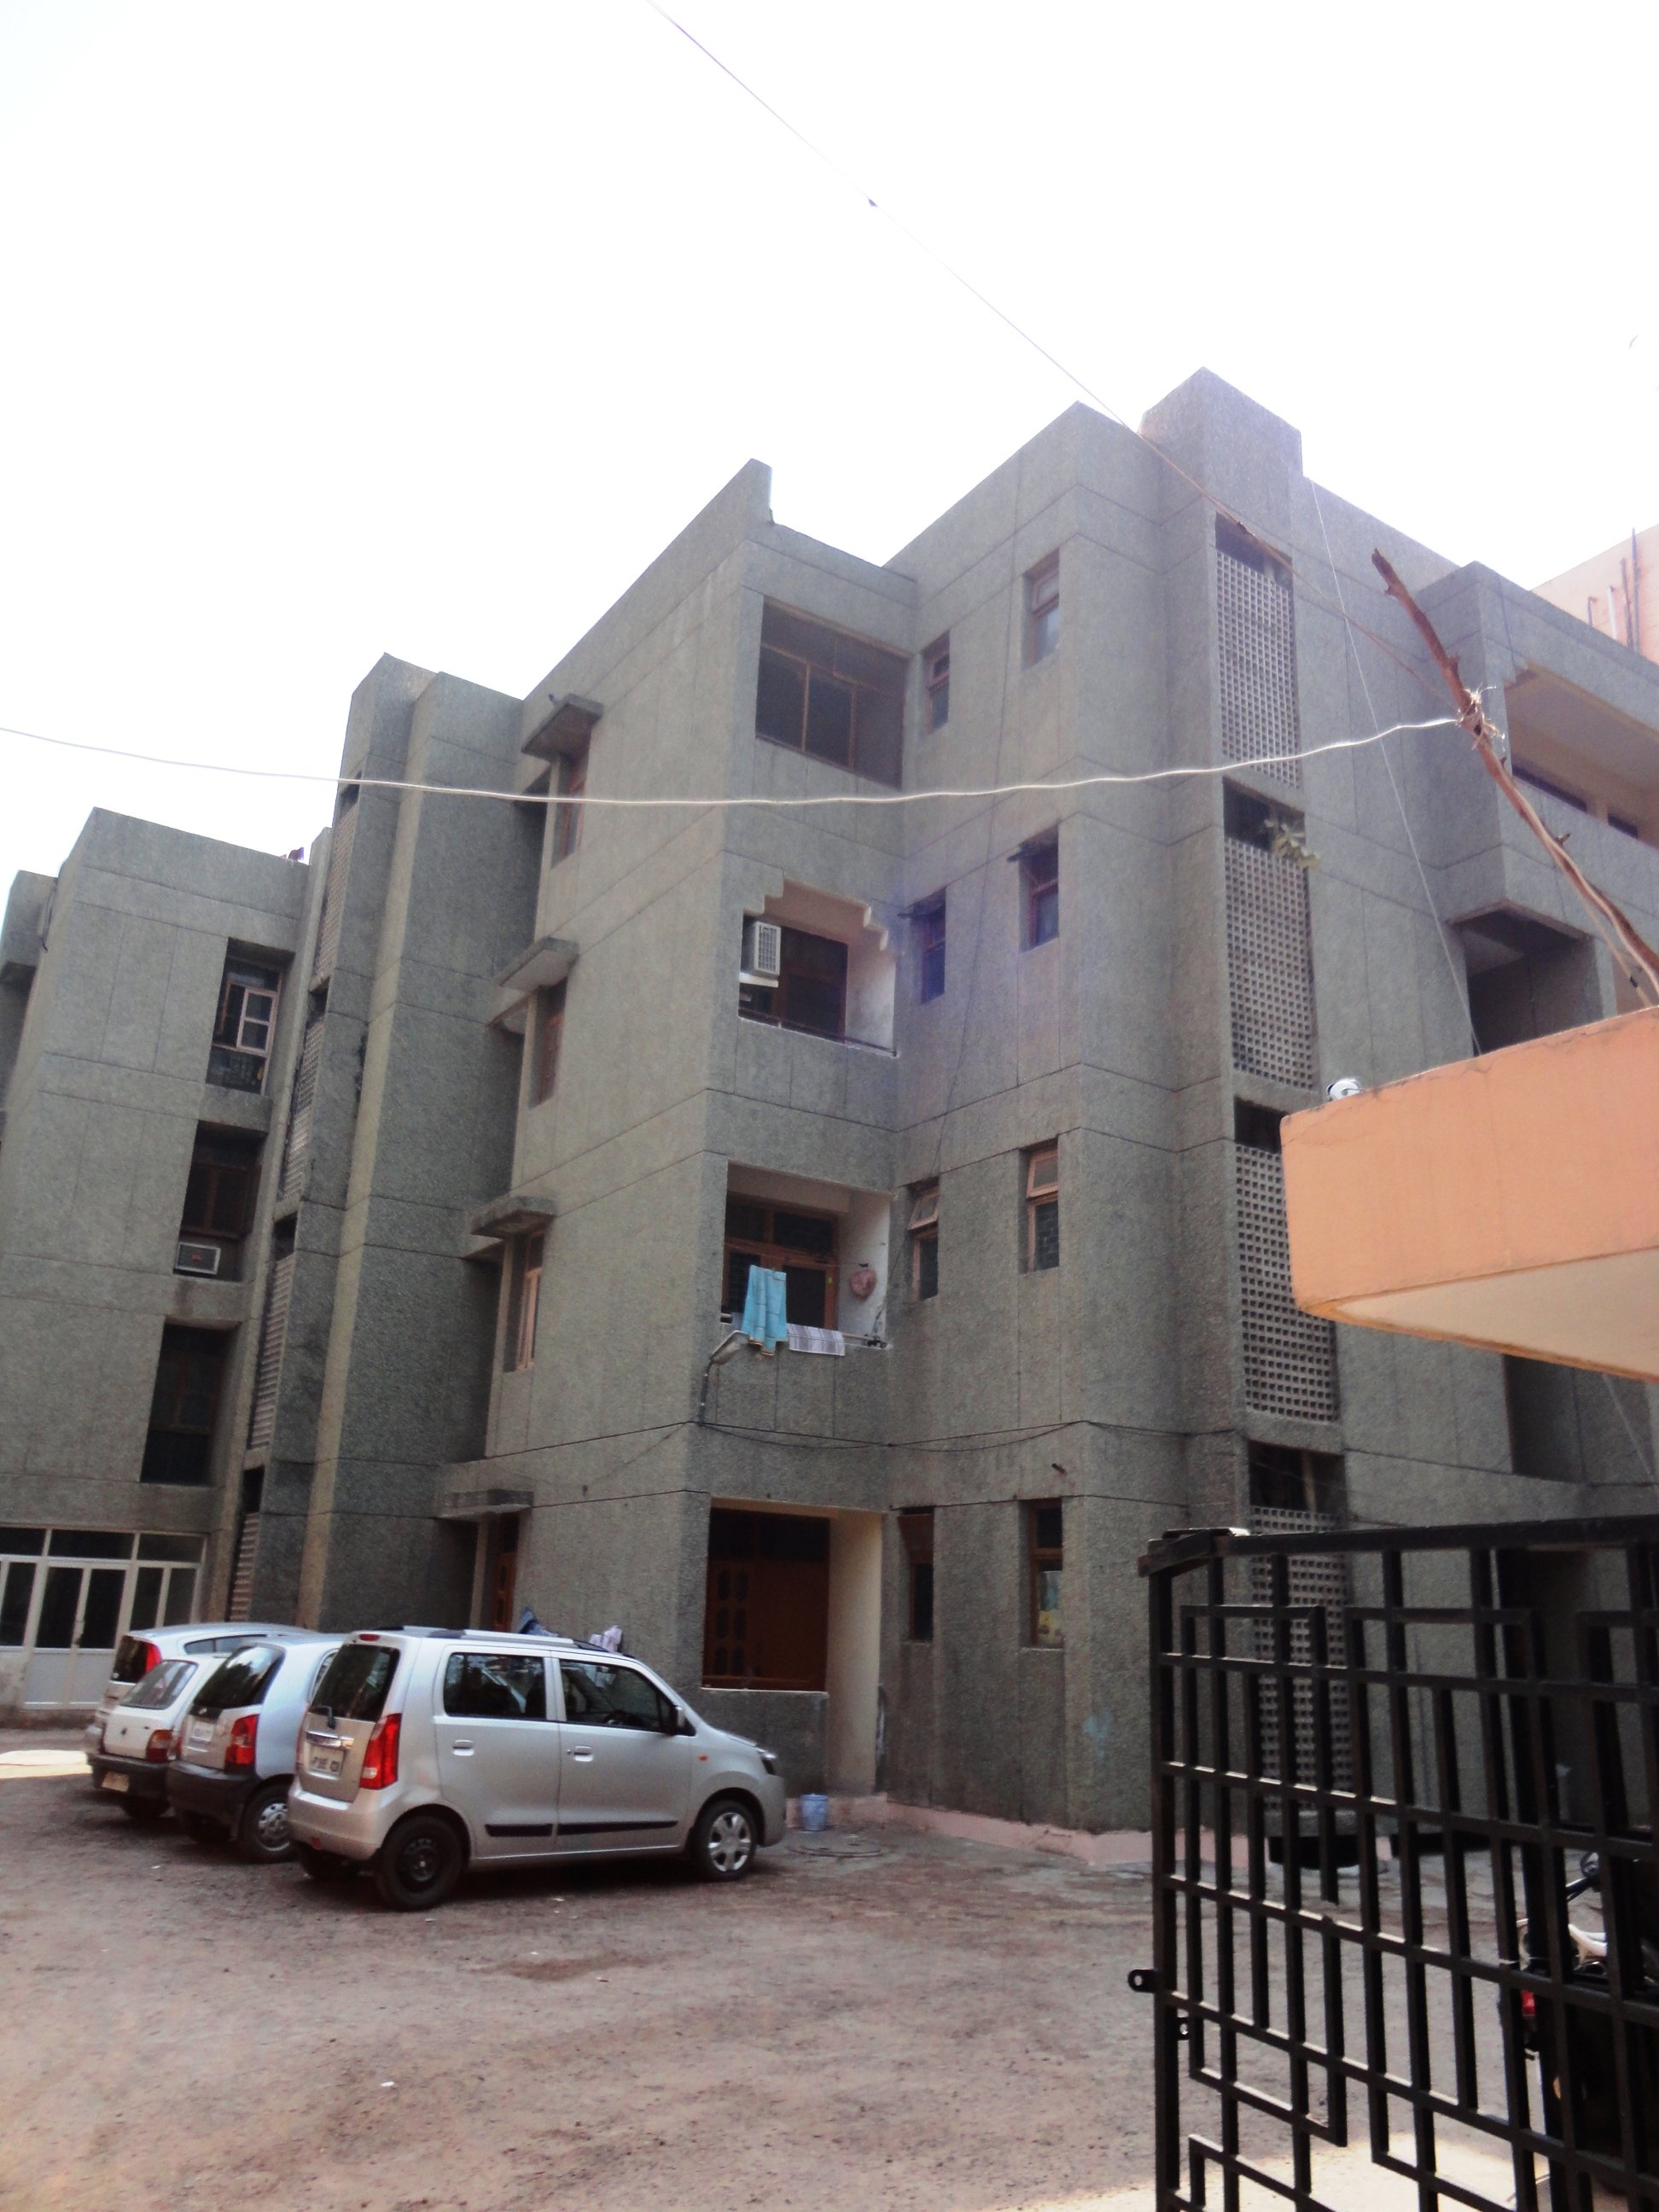 Jubilee Apartments CGHS Project Deails